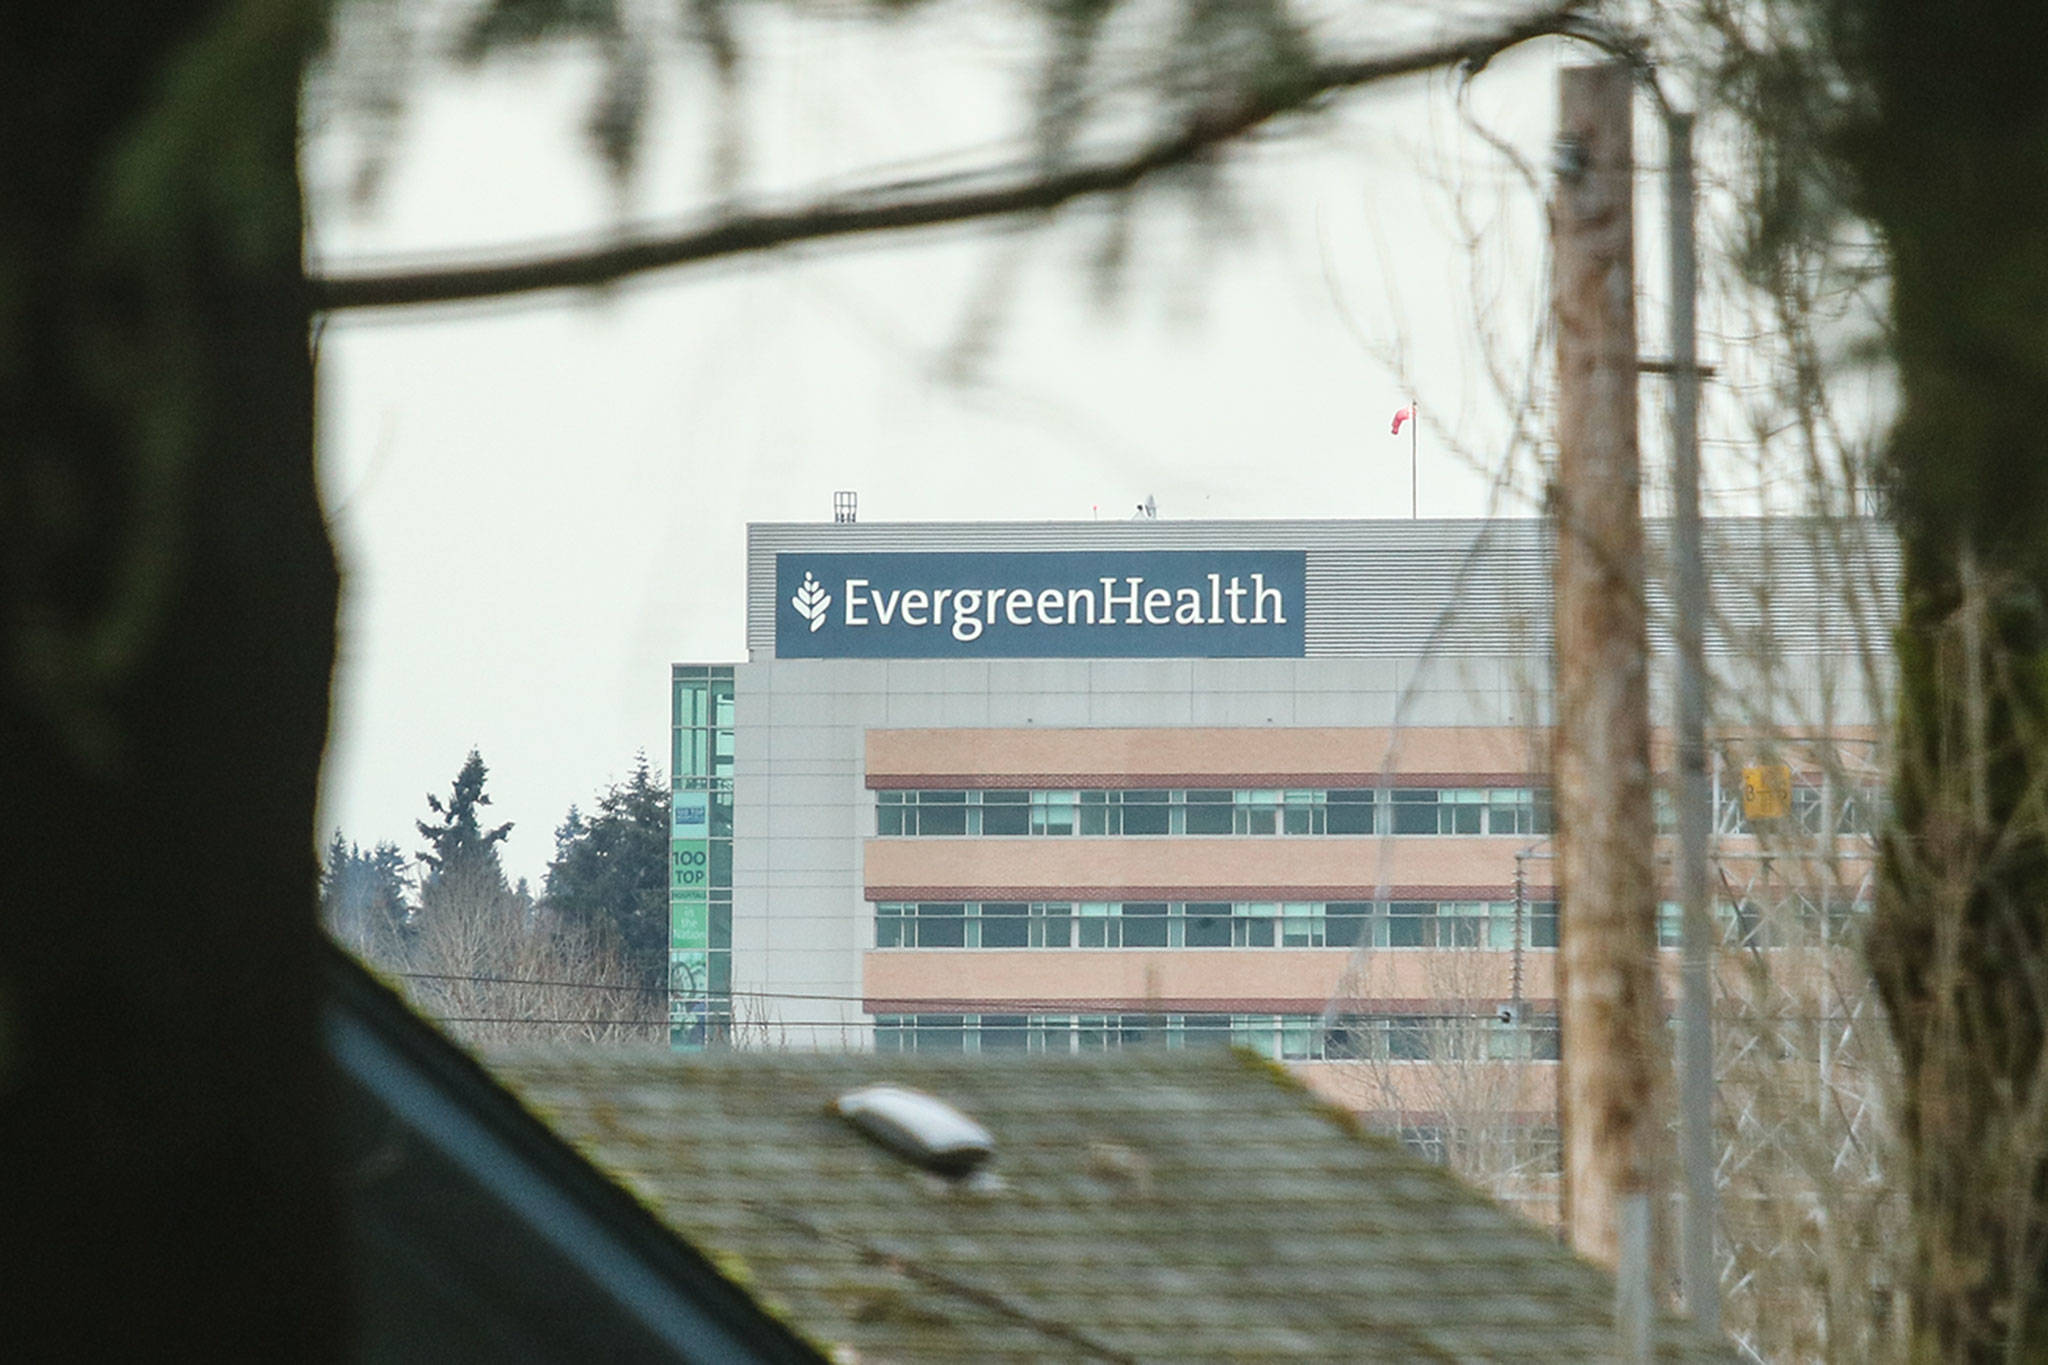 EvergreenHealth to provide drug disposal and drop-off kiosk